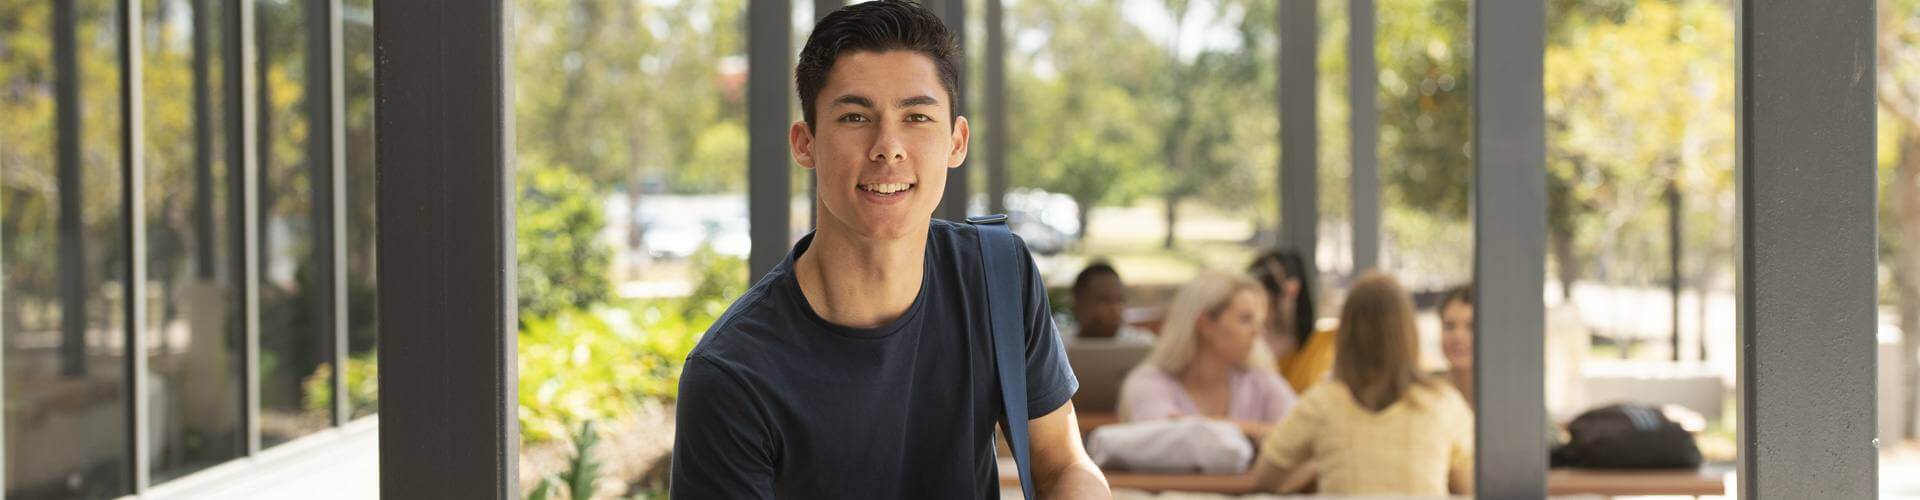 A young male university student sitting outside, smiling at the camera.